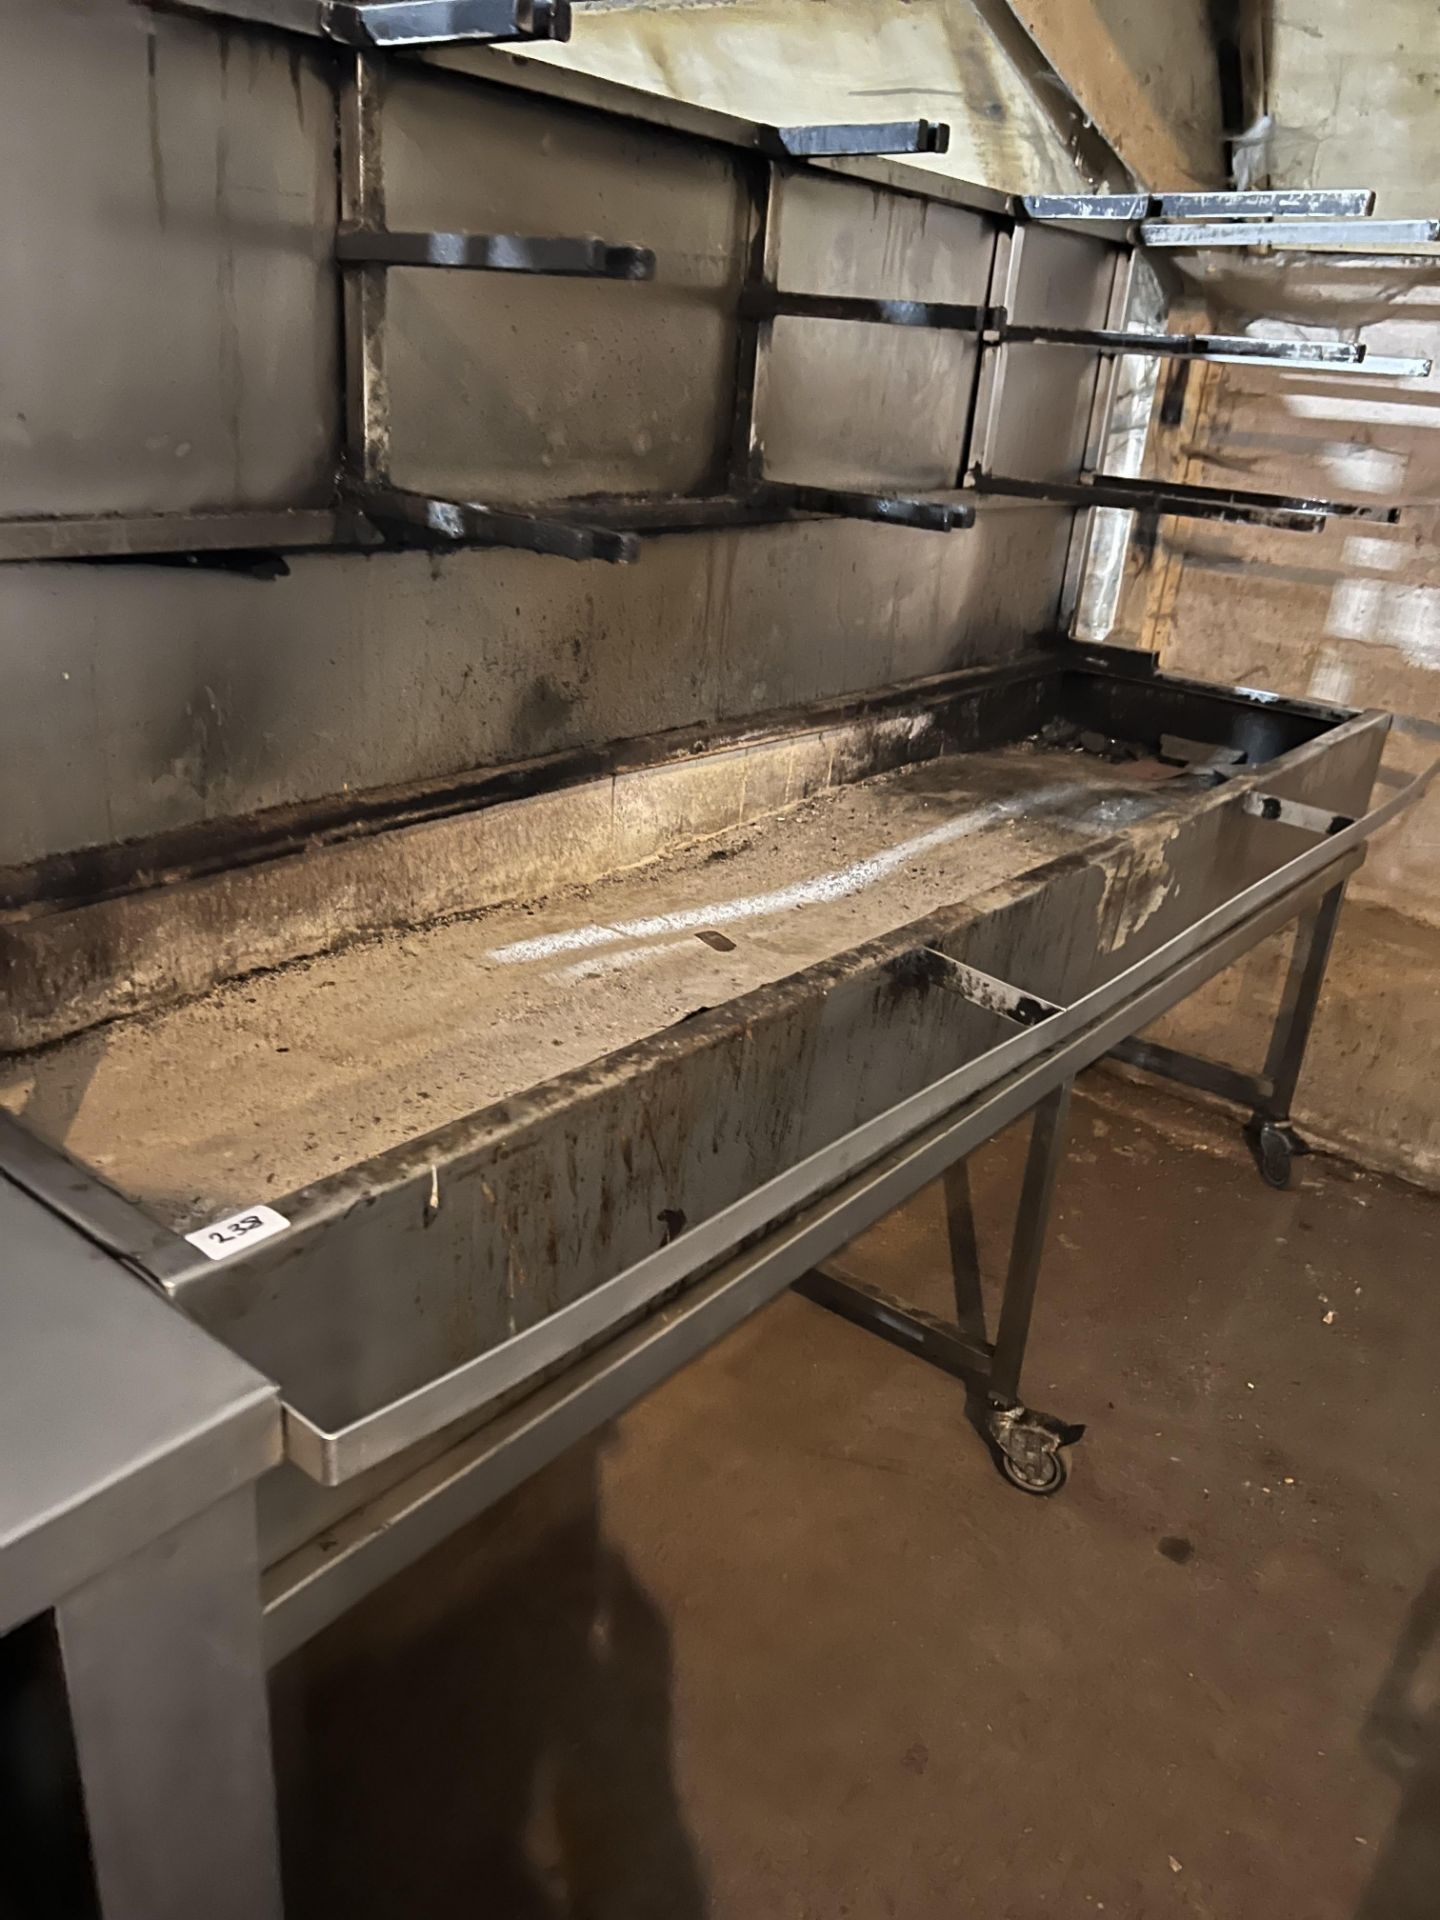 Stone grill removed from a Burger restaurant, requires grill plates 2360w x 660mm deep Would also ma - Image 2 of 2